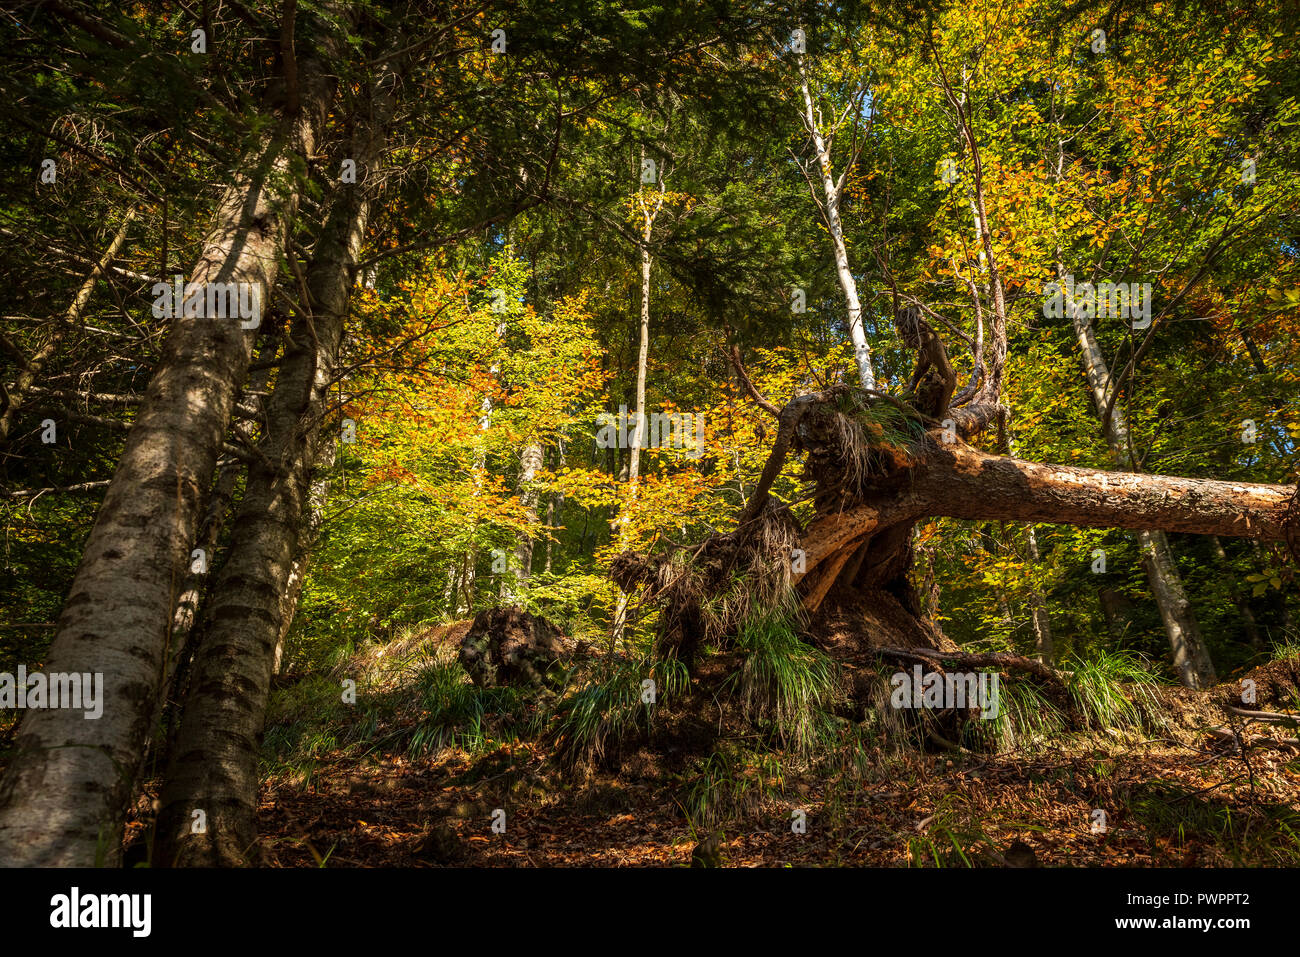 Fallen, uprooted tree in a magical wood in autumn Stock Photo